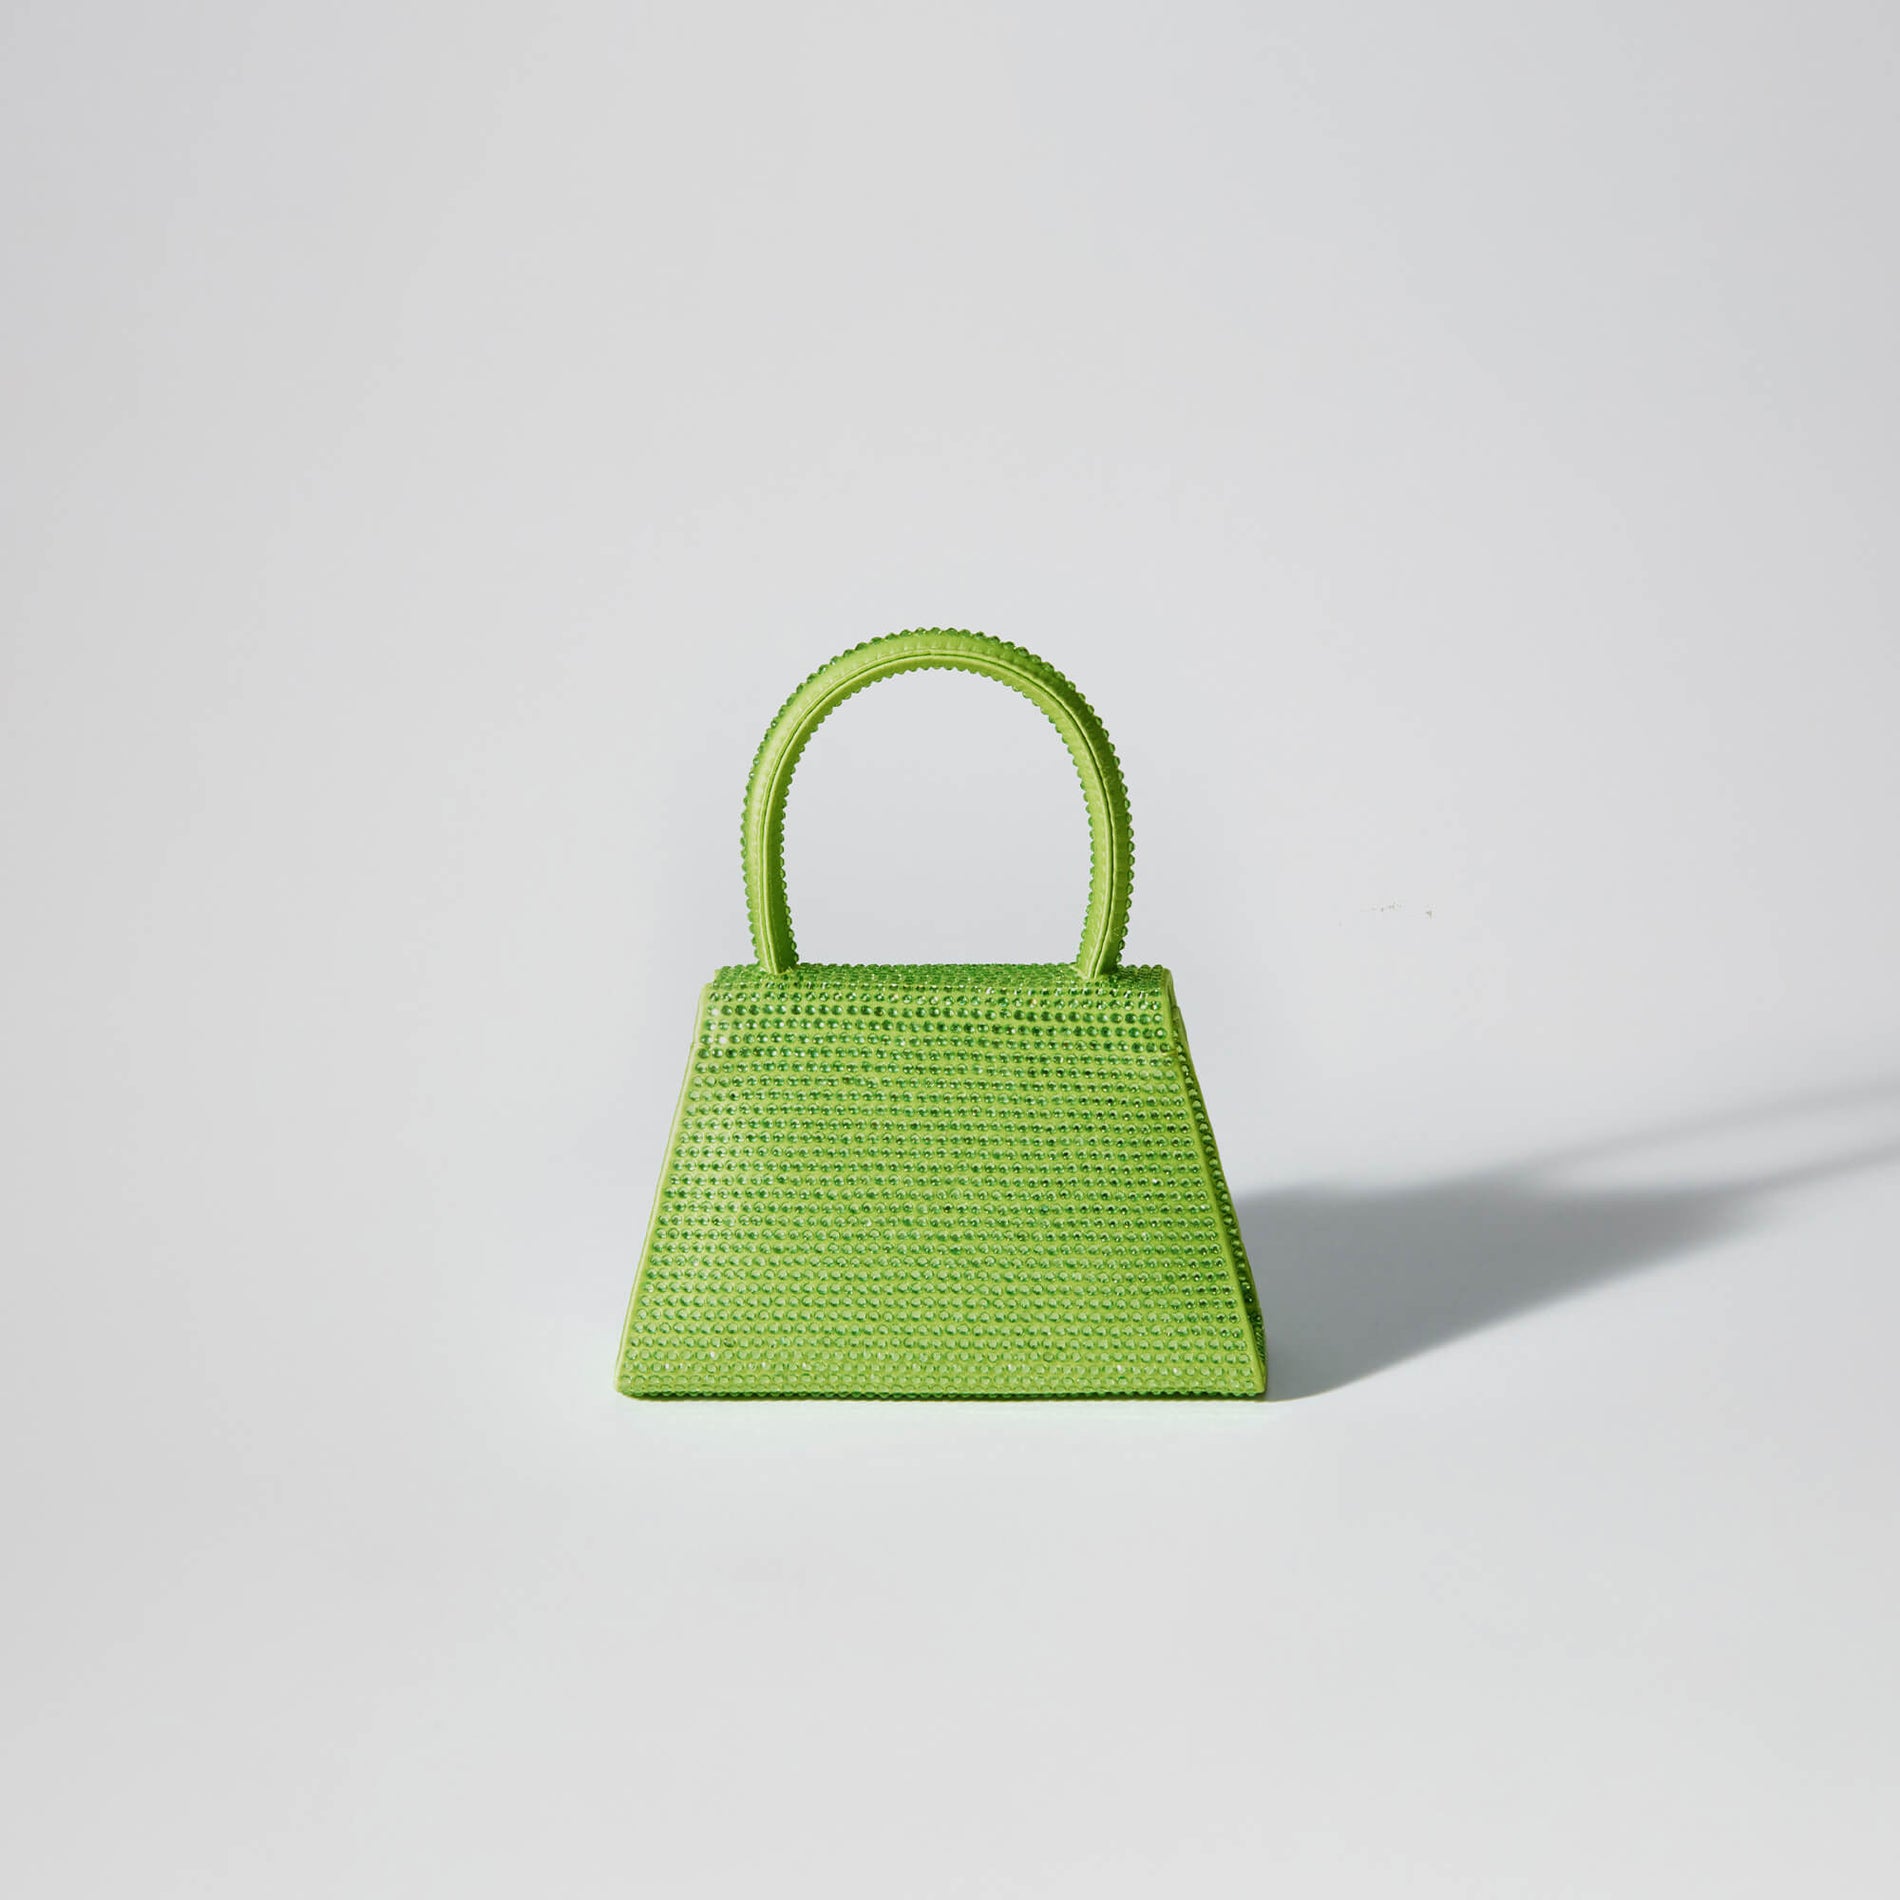 The Bow Micro in Lime Rhinestone